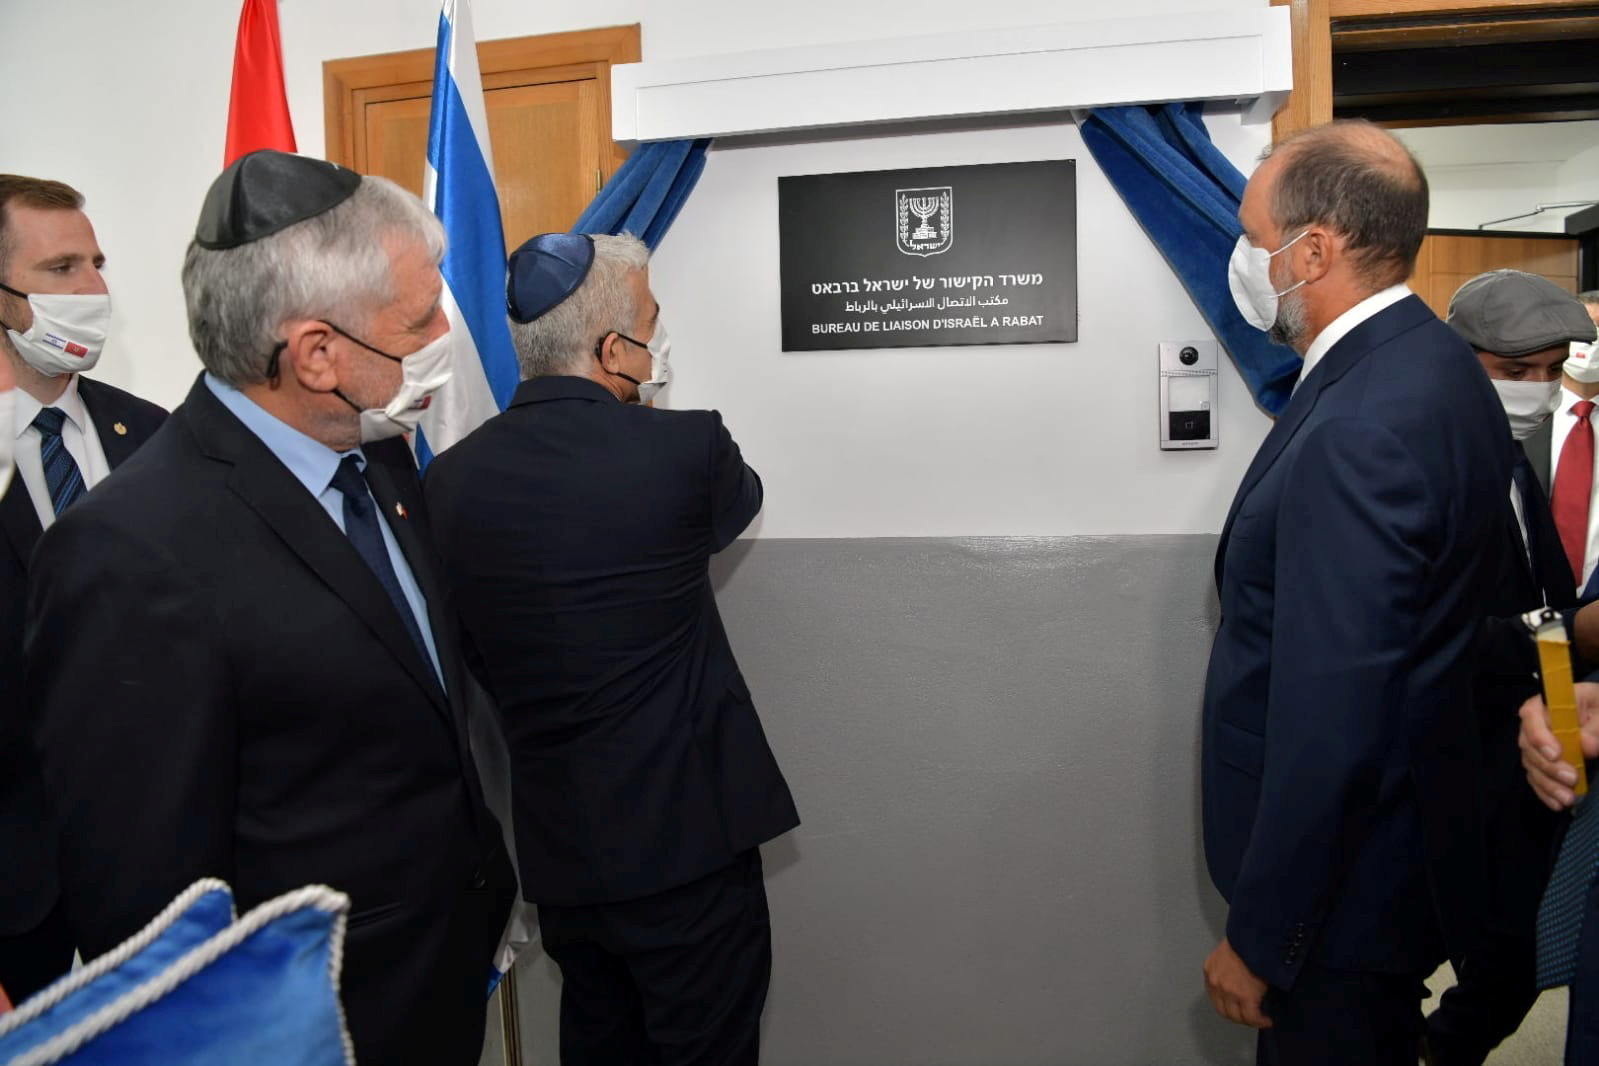 Israeli Foreign Minister Lapid inaugurates Israel's diplomatic mission in Rabat